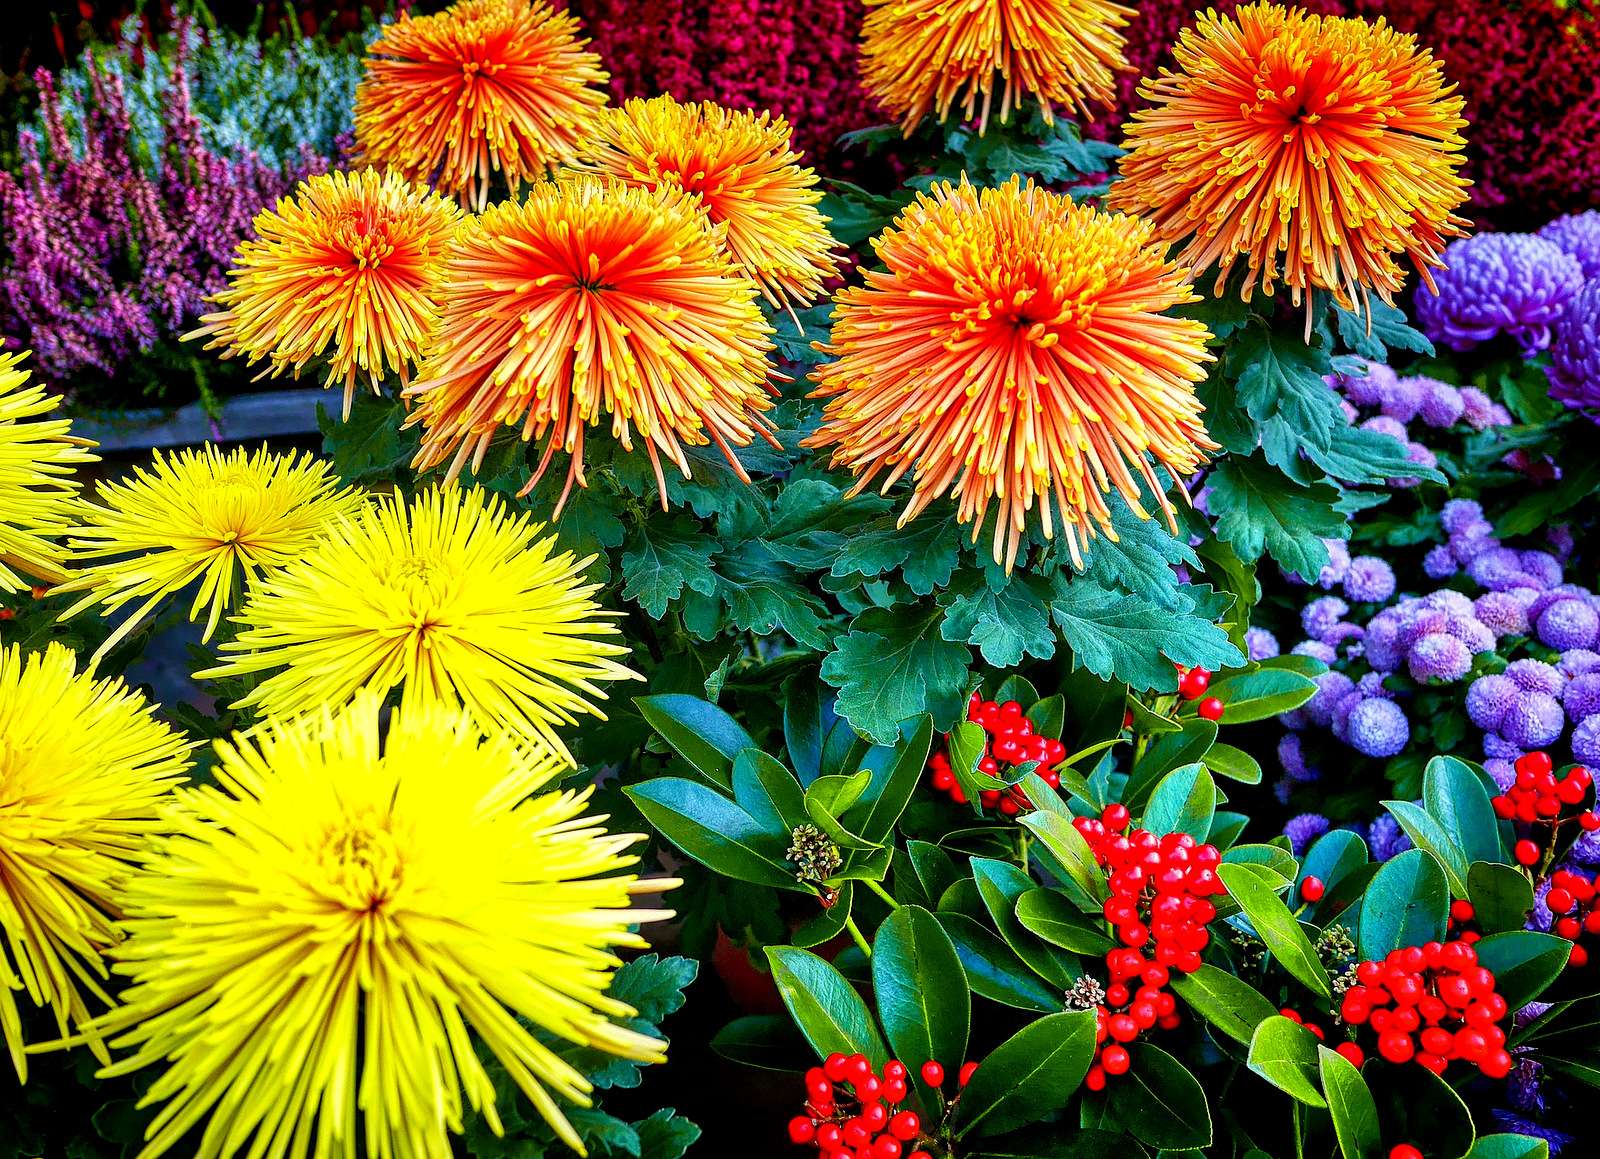 Lush autumn colors at the flower market jigsaw puzzle online